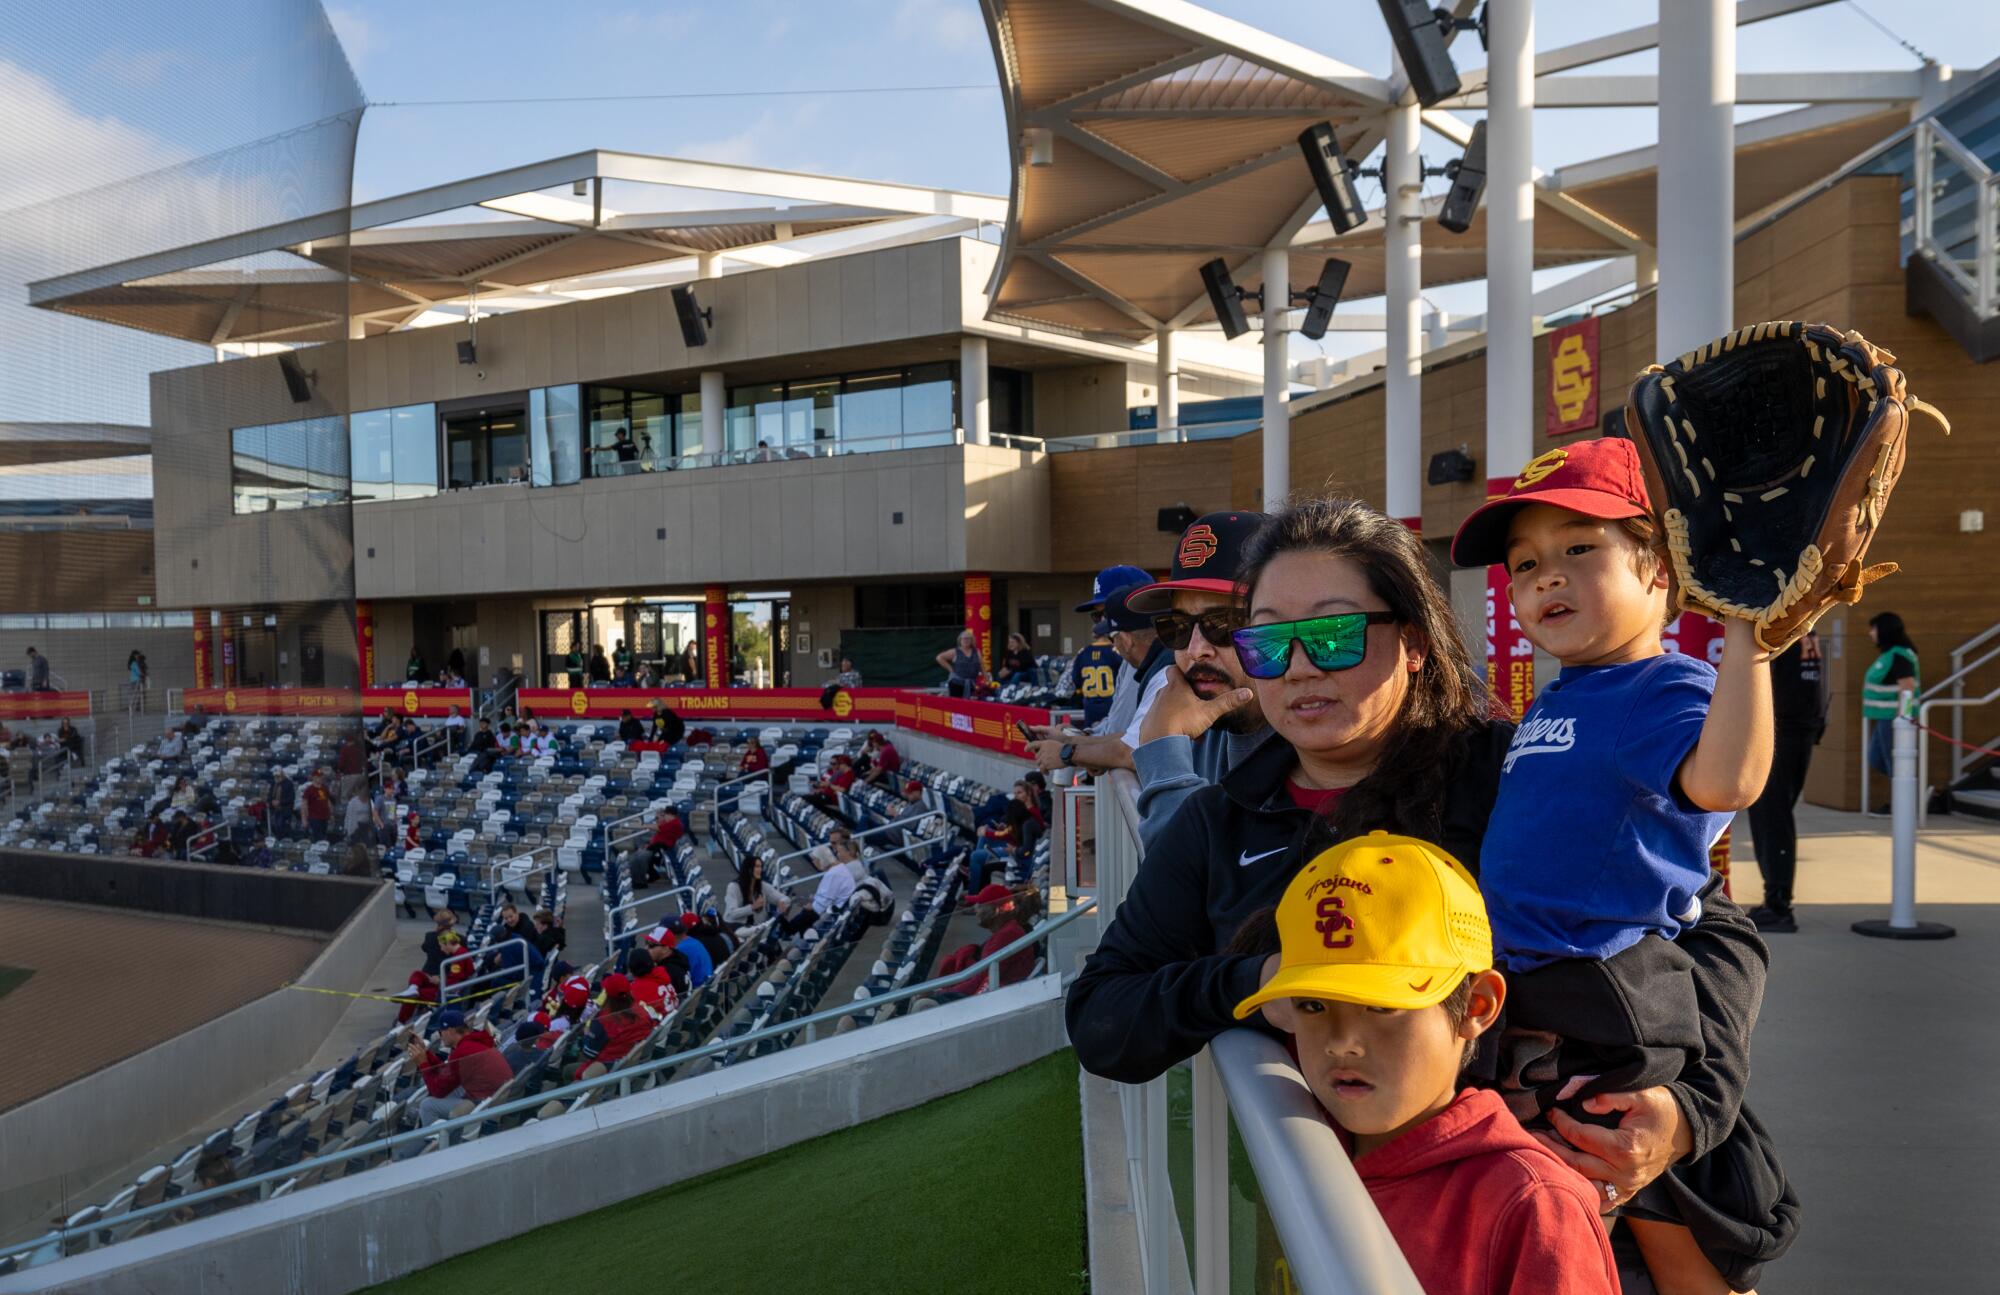 Bobby and Blaire Burkitt, and their kids Tre, 8, Nicholas, 6, watches USC warm up before the game in Irvine on May 3.